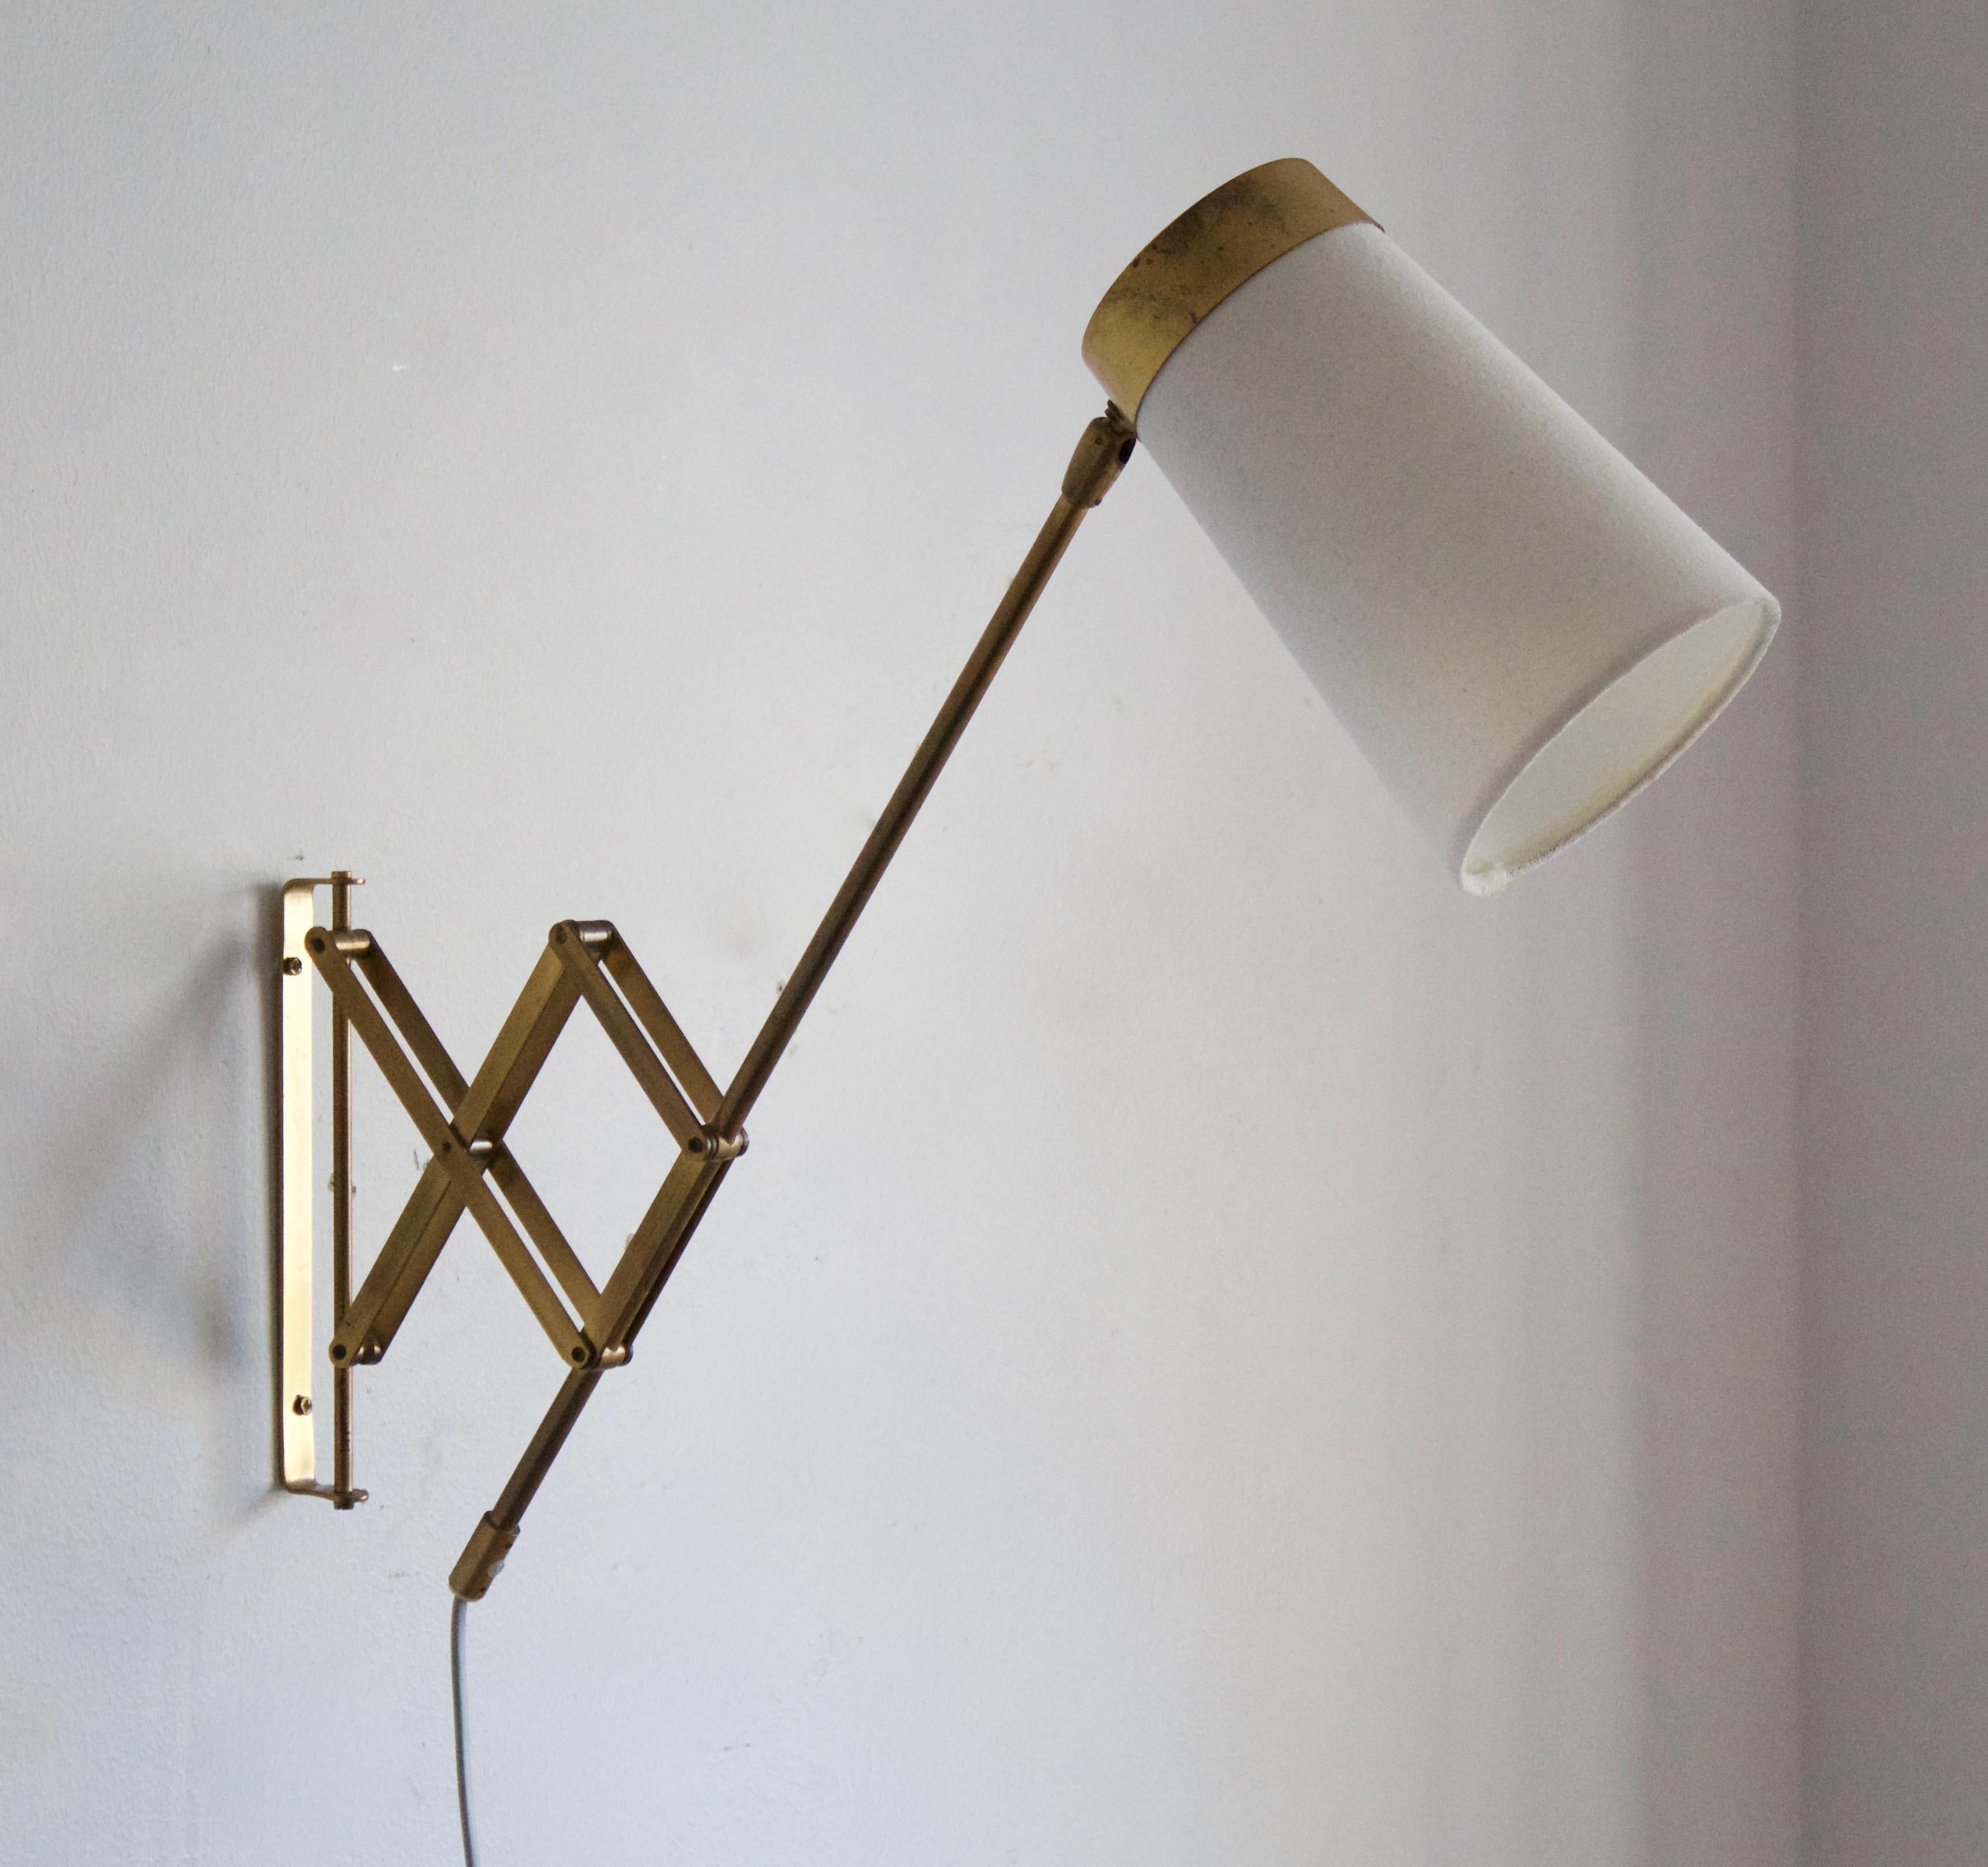 A functionalist wall light / task light, designed by Th. Valentiner and produced Poul Dinesesen in Denmark, 1950s.

Dimensions variable.